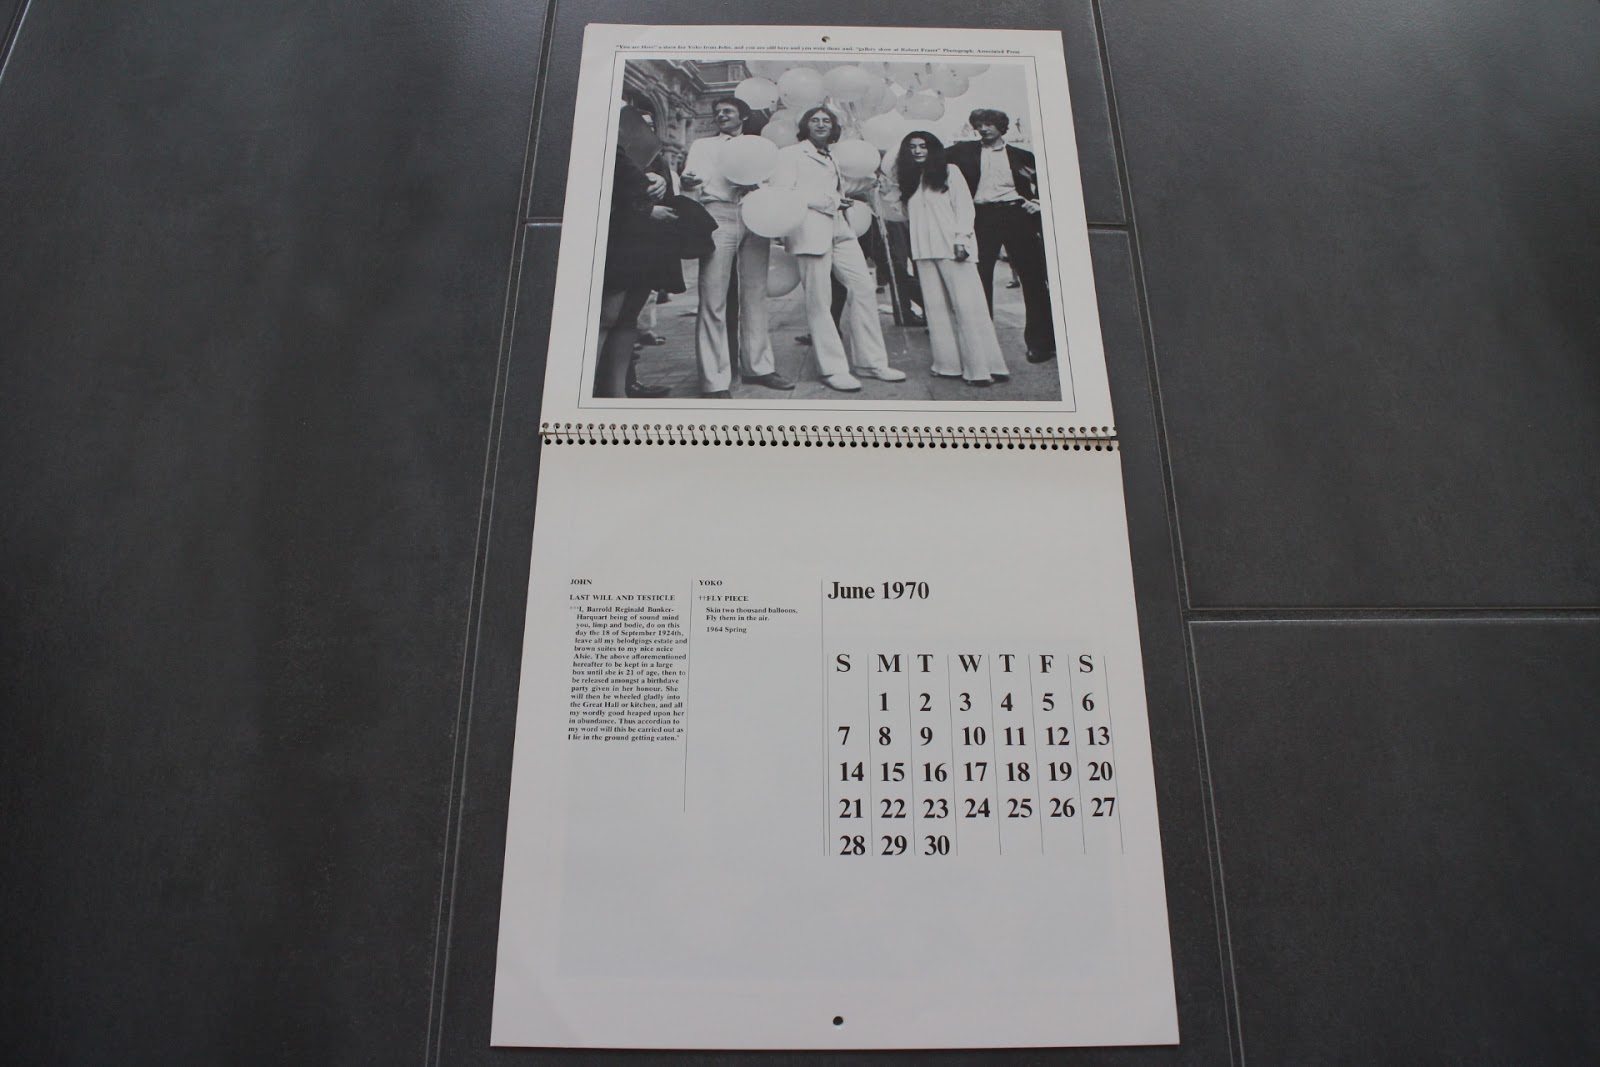 The Beatles-levyhylly: Plastic Ono Band: Live Peace In Toronto 1969 -LP (US  1st pressing) in shrink + hype sticker + 1970 calendar